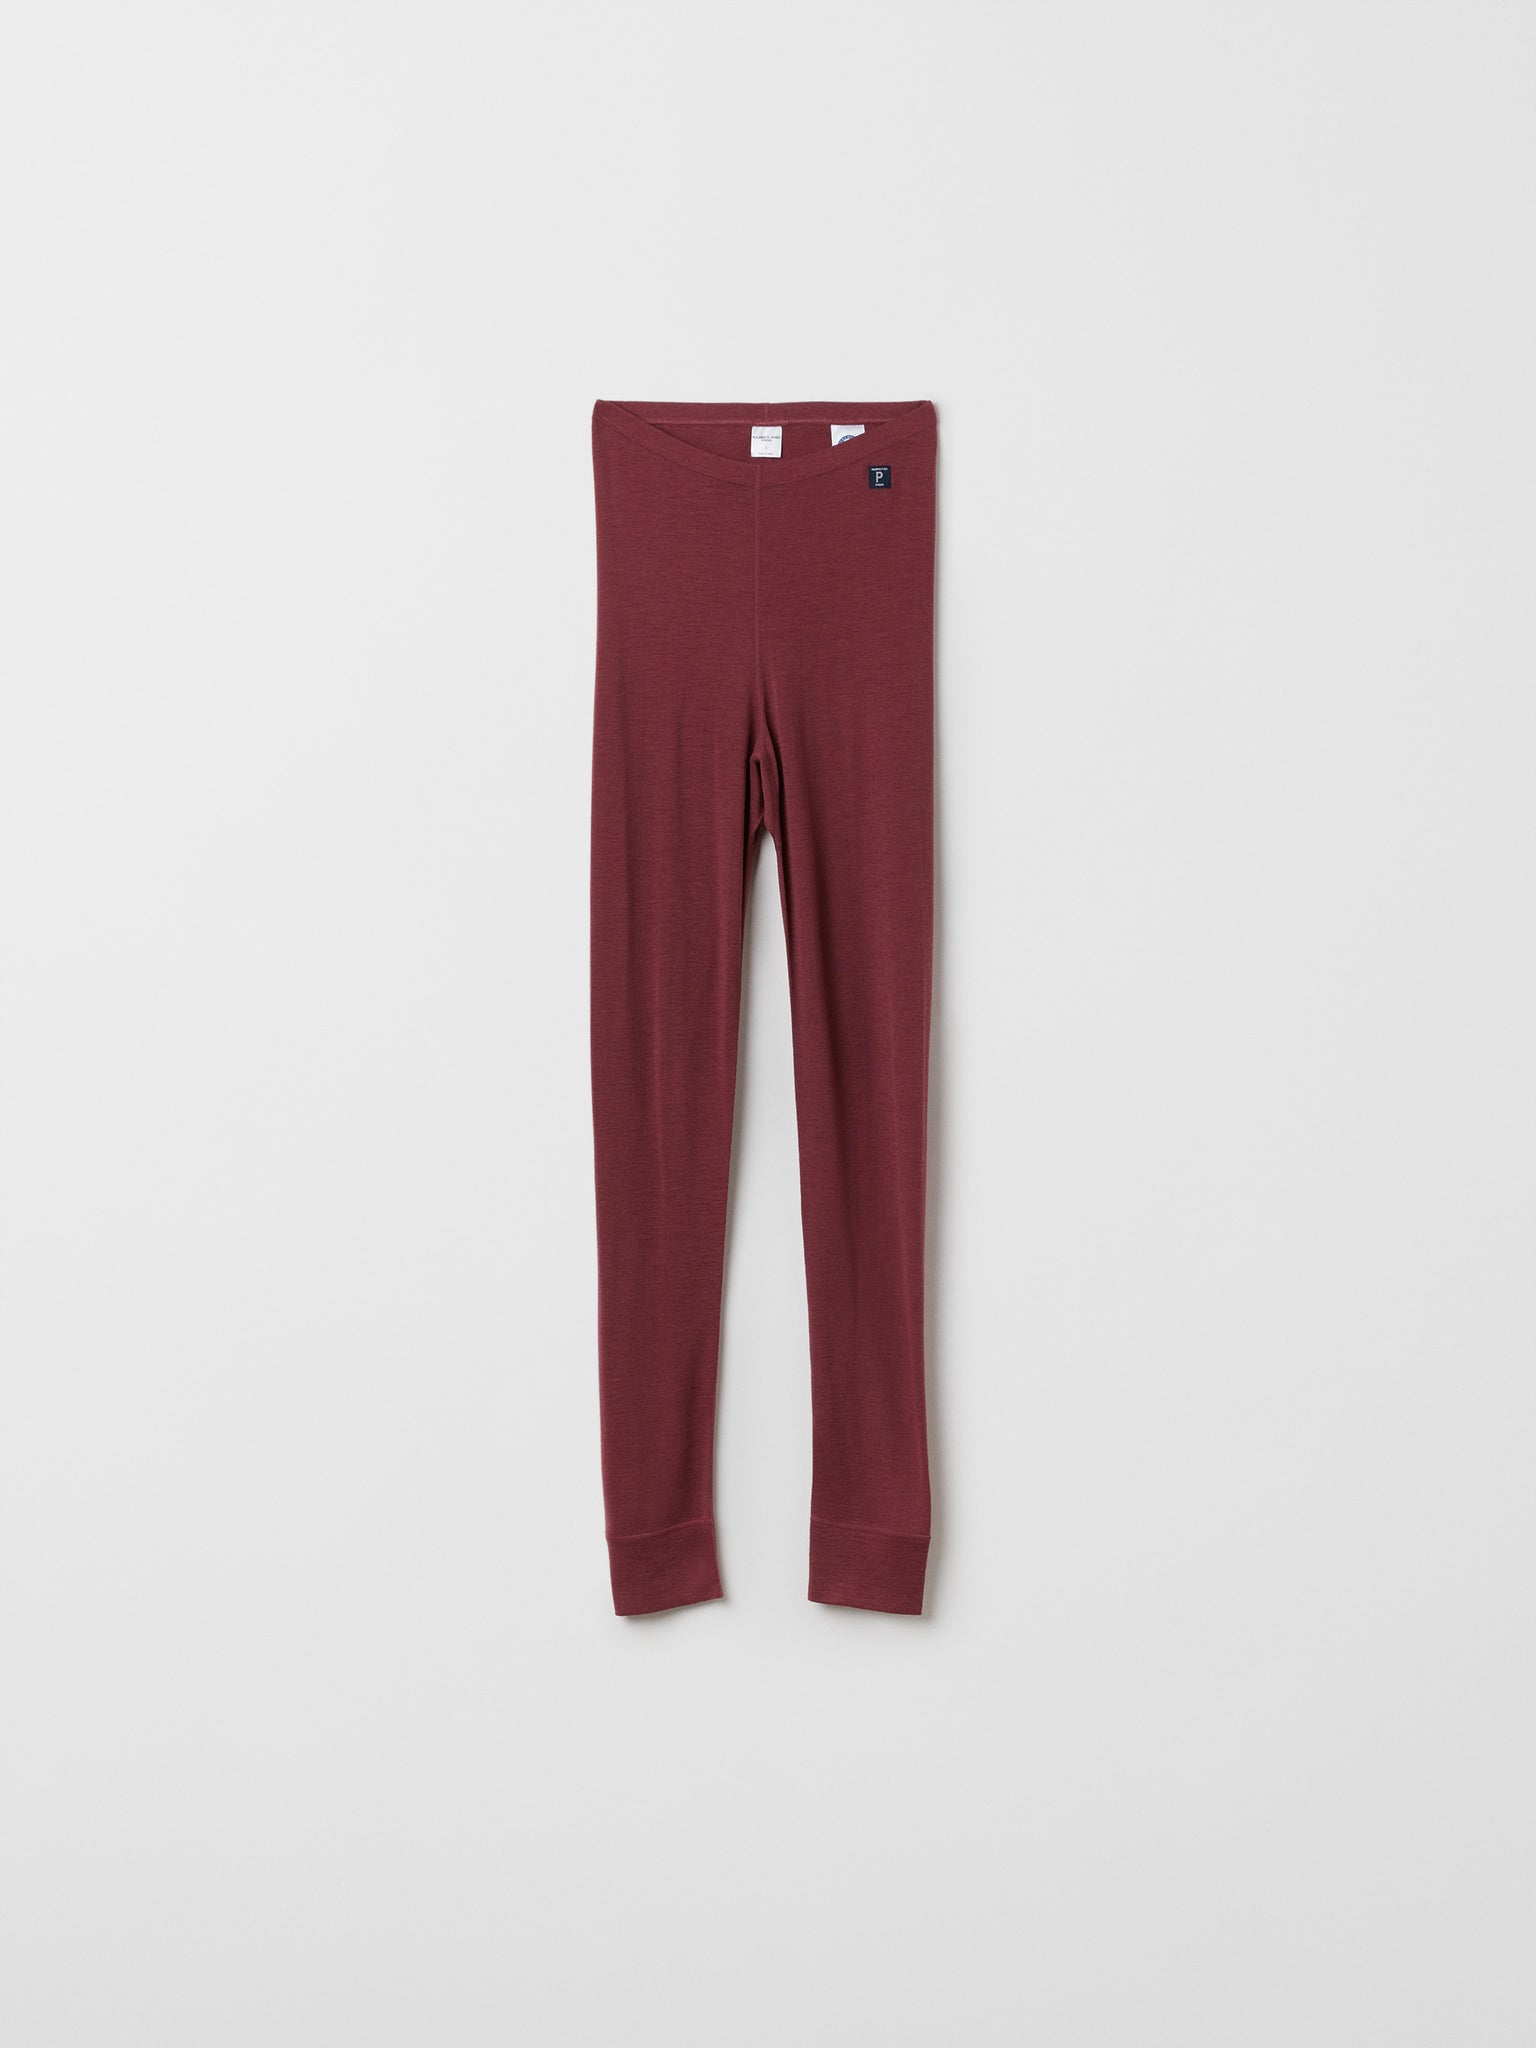 Red Adult Merino Wool Long Johns from the Polarn O. Pyret outerwear collection. Ethically produced kids outerwear.